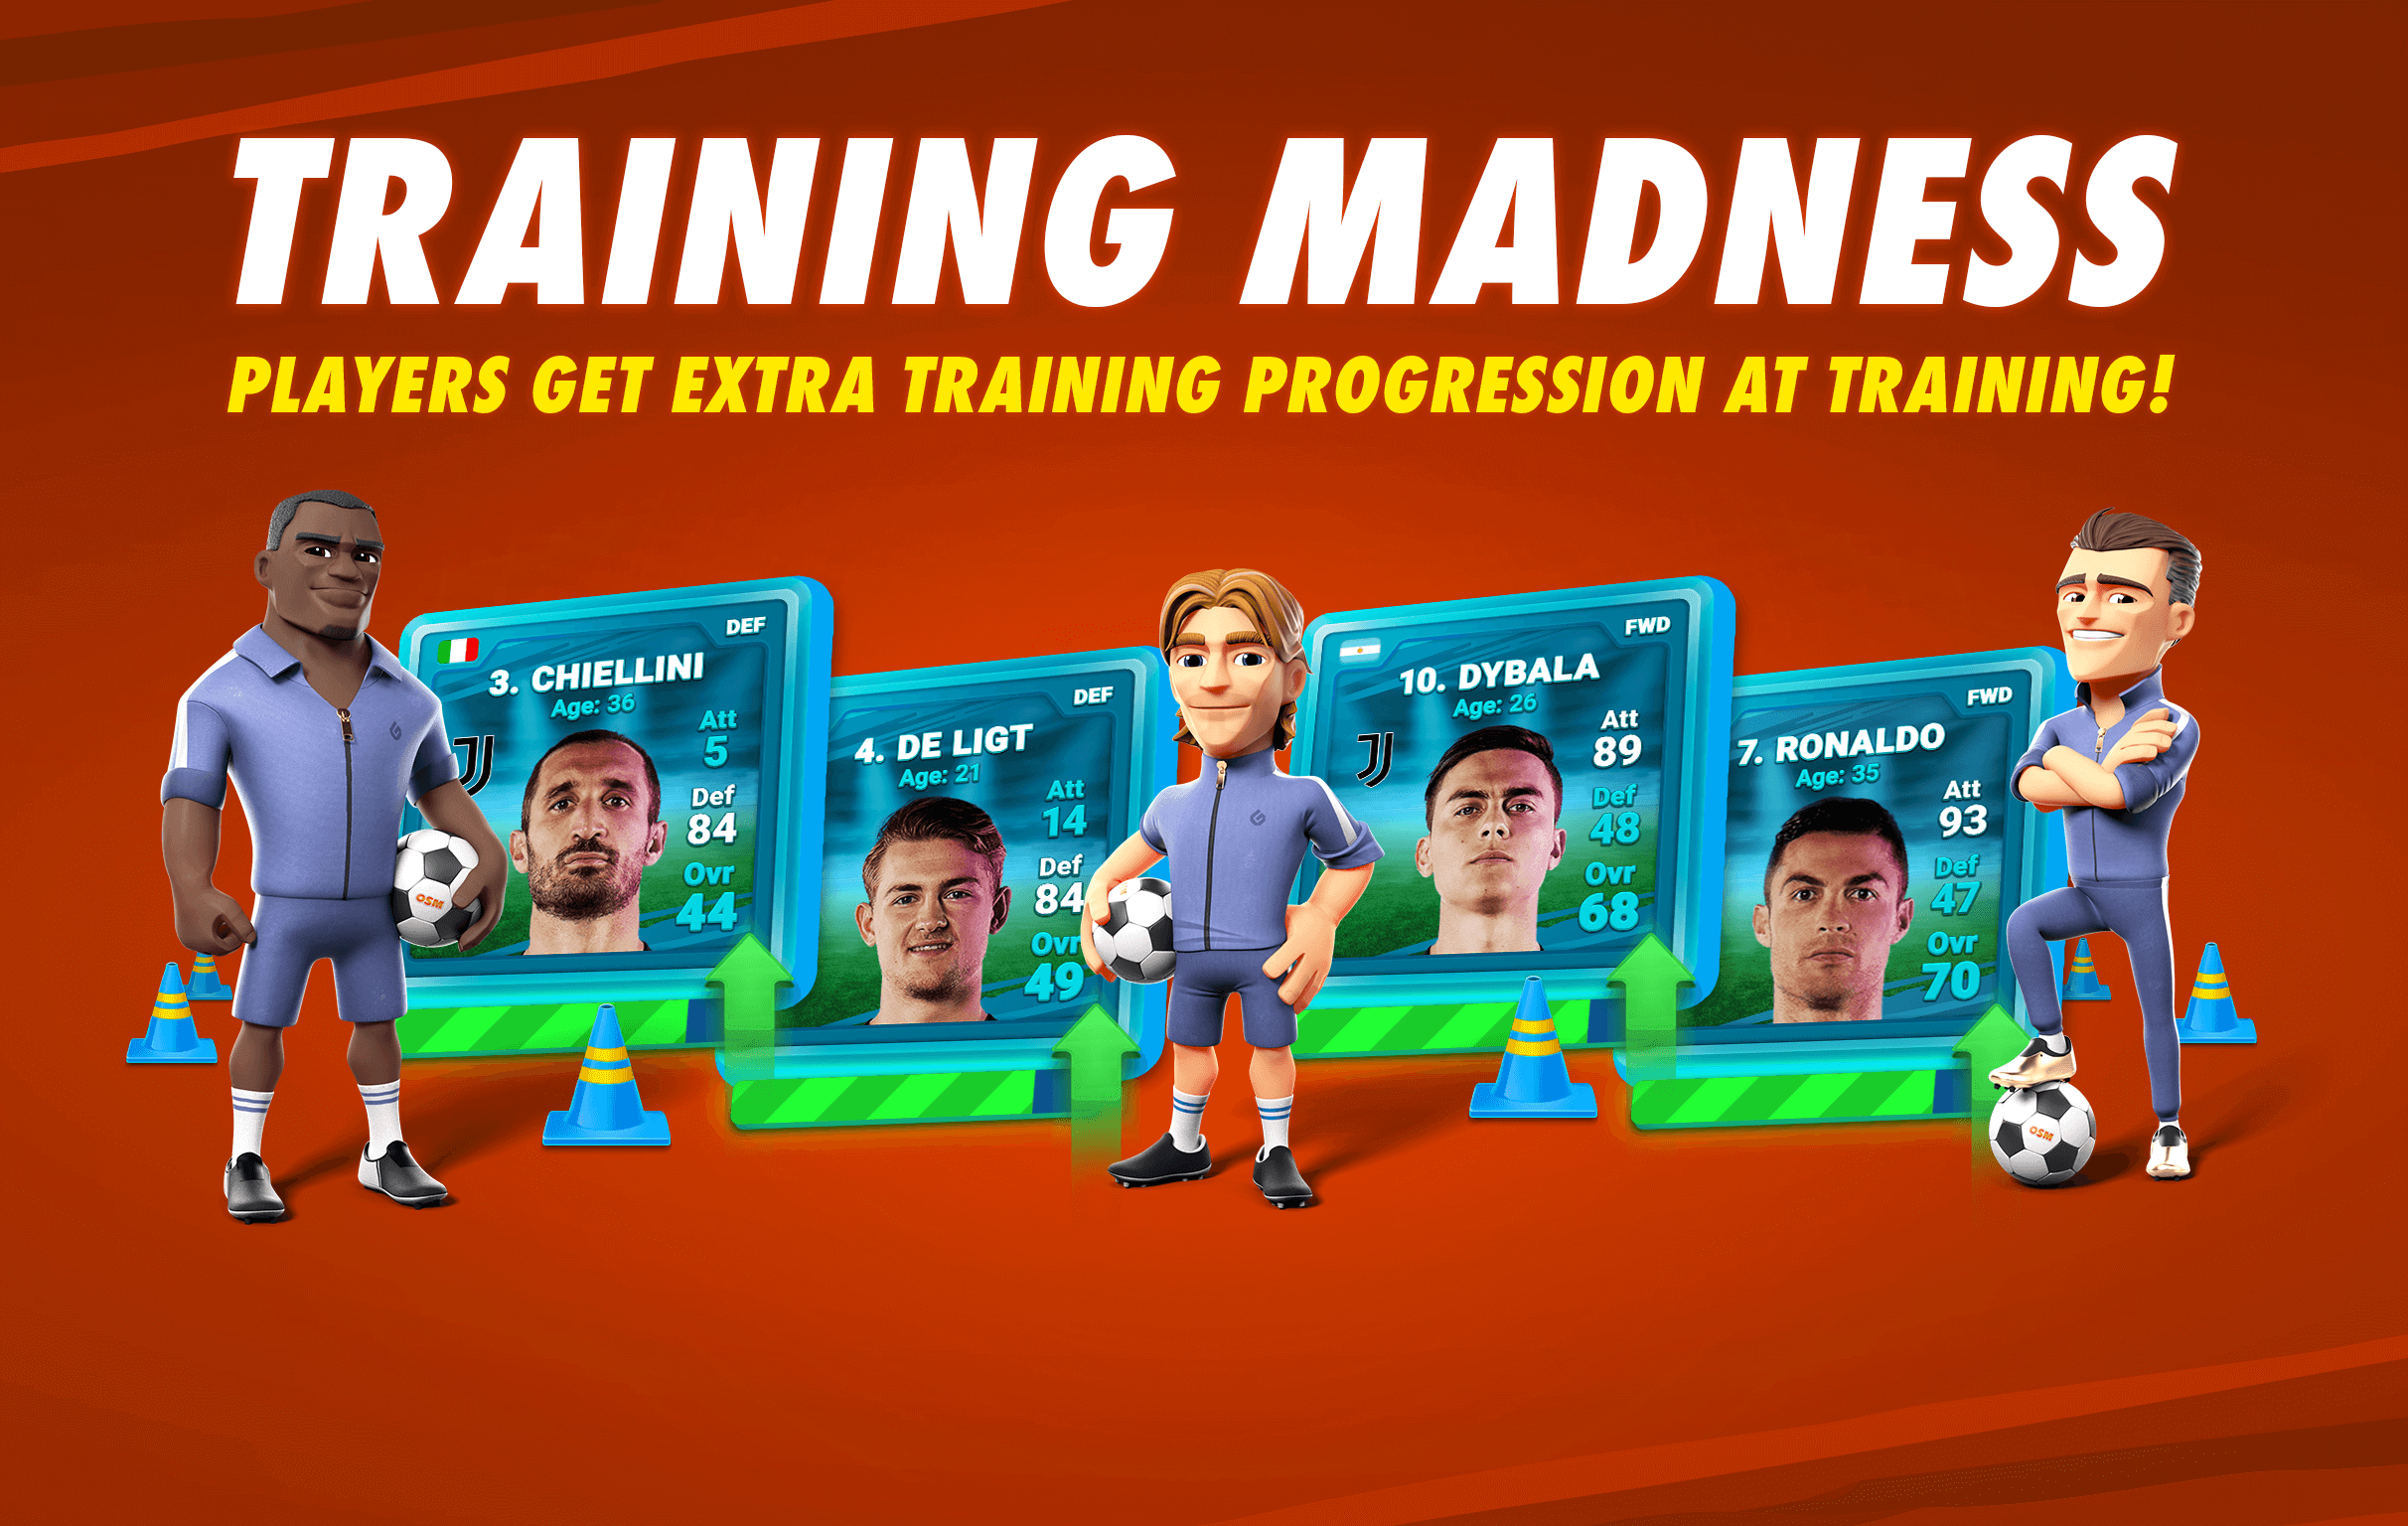 CP_Training Madness_EN.png